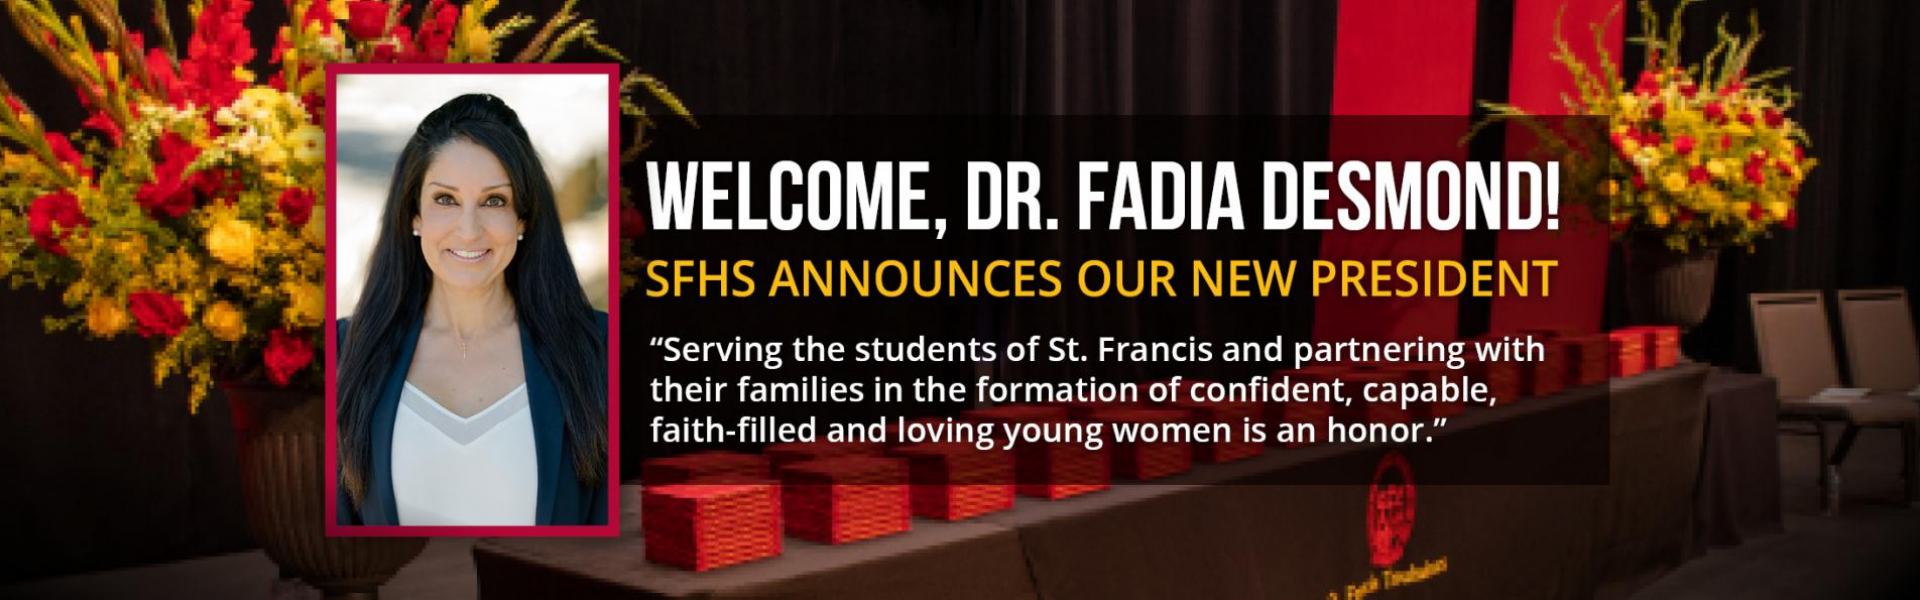 Welcome, Dr. Fadia Desmond